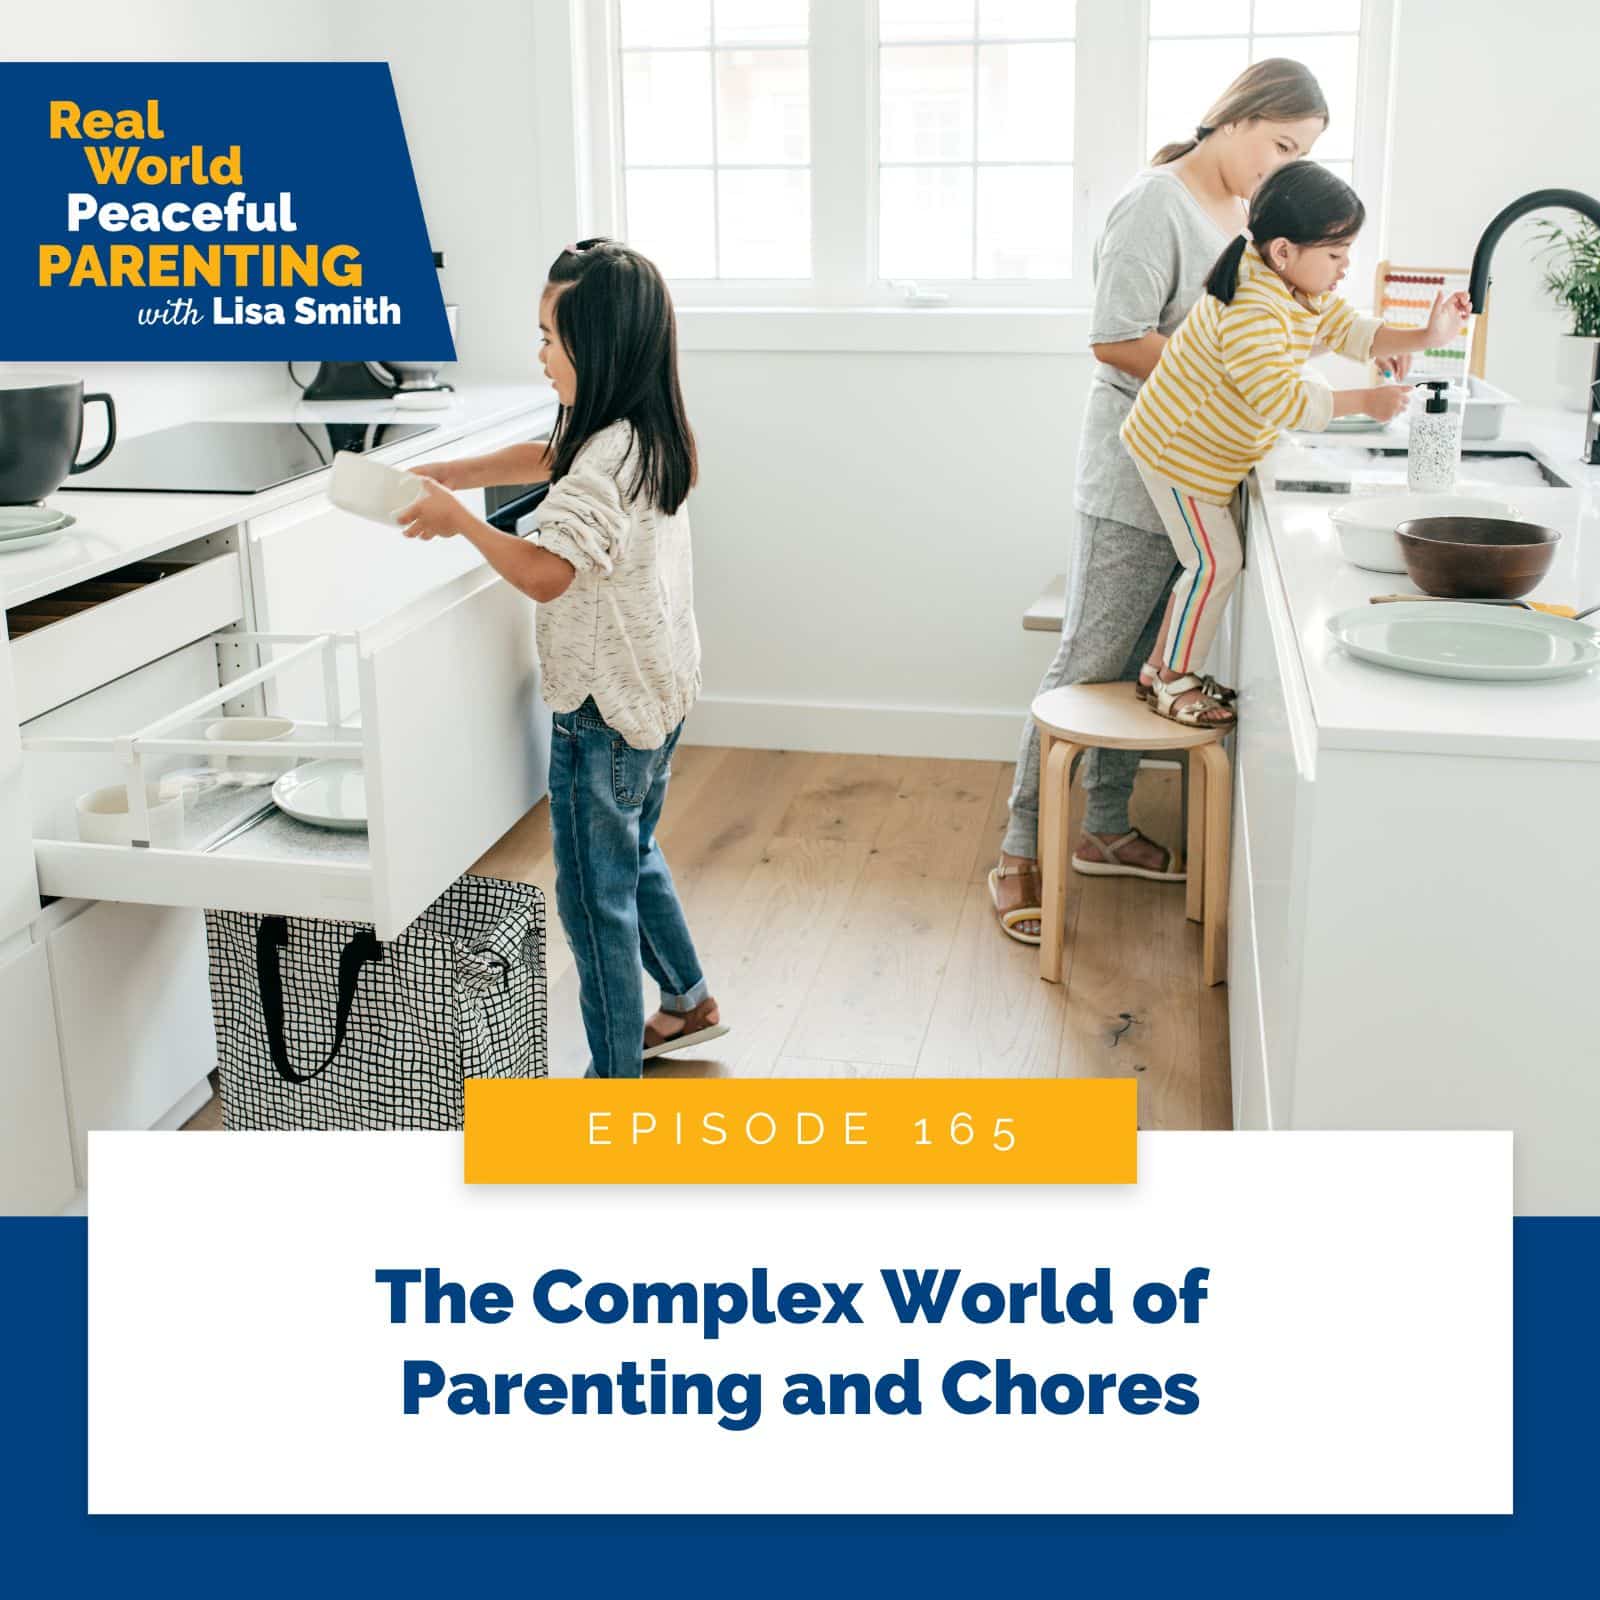 Real World Peaceful Parenting with Lisa Smith | The Complex World of Parenting and Chores